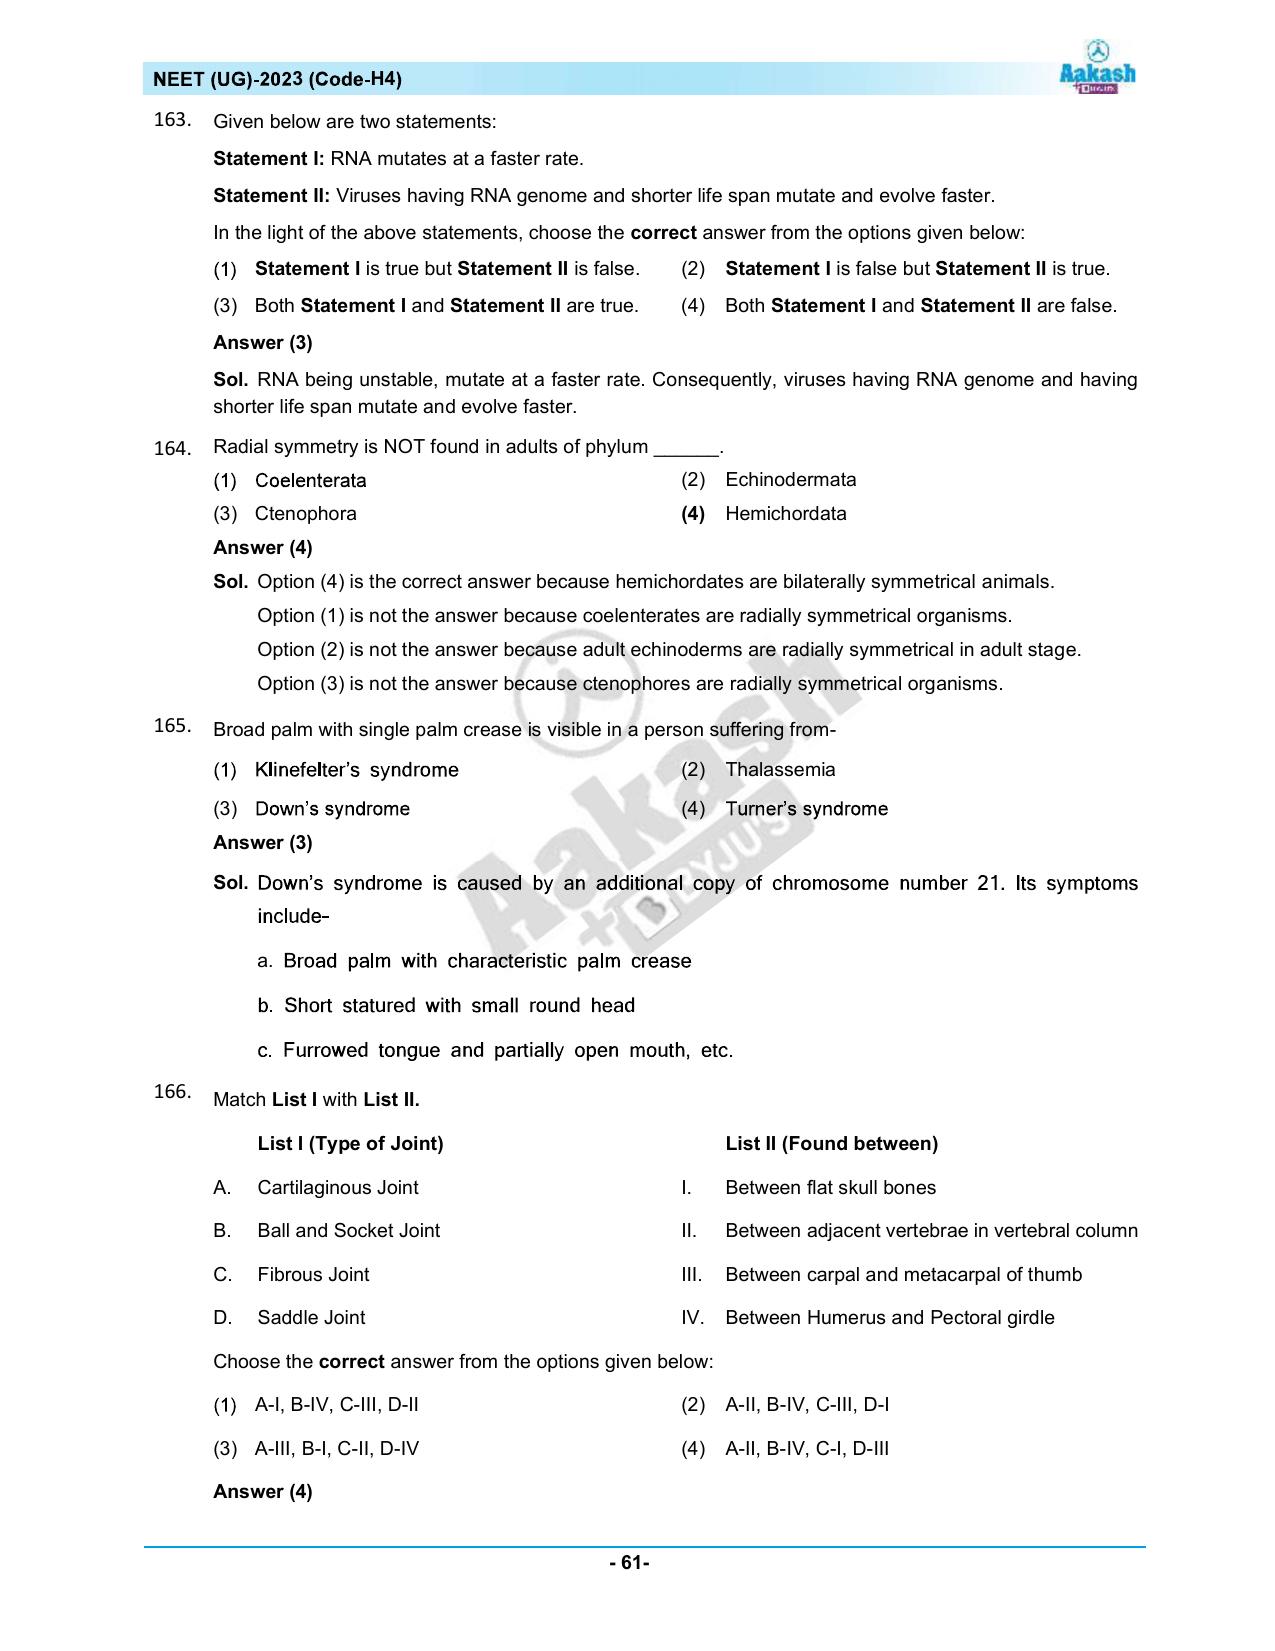 NEET 2023 Question Paper H4 - Page 61